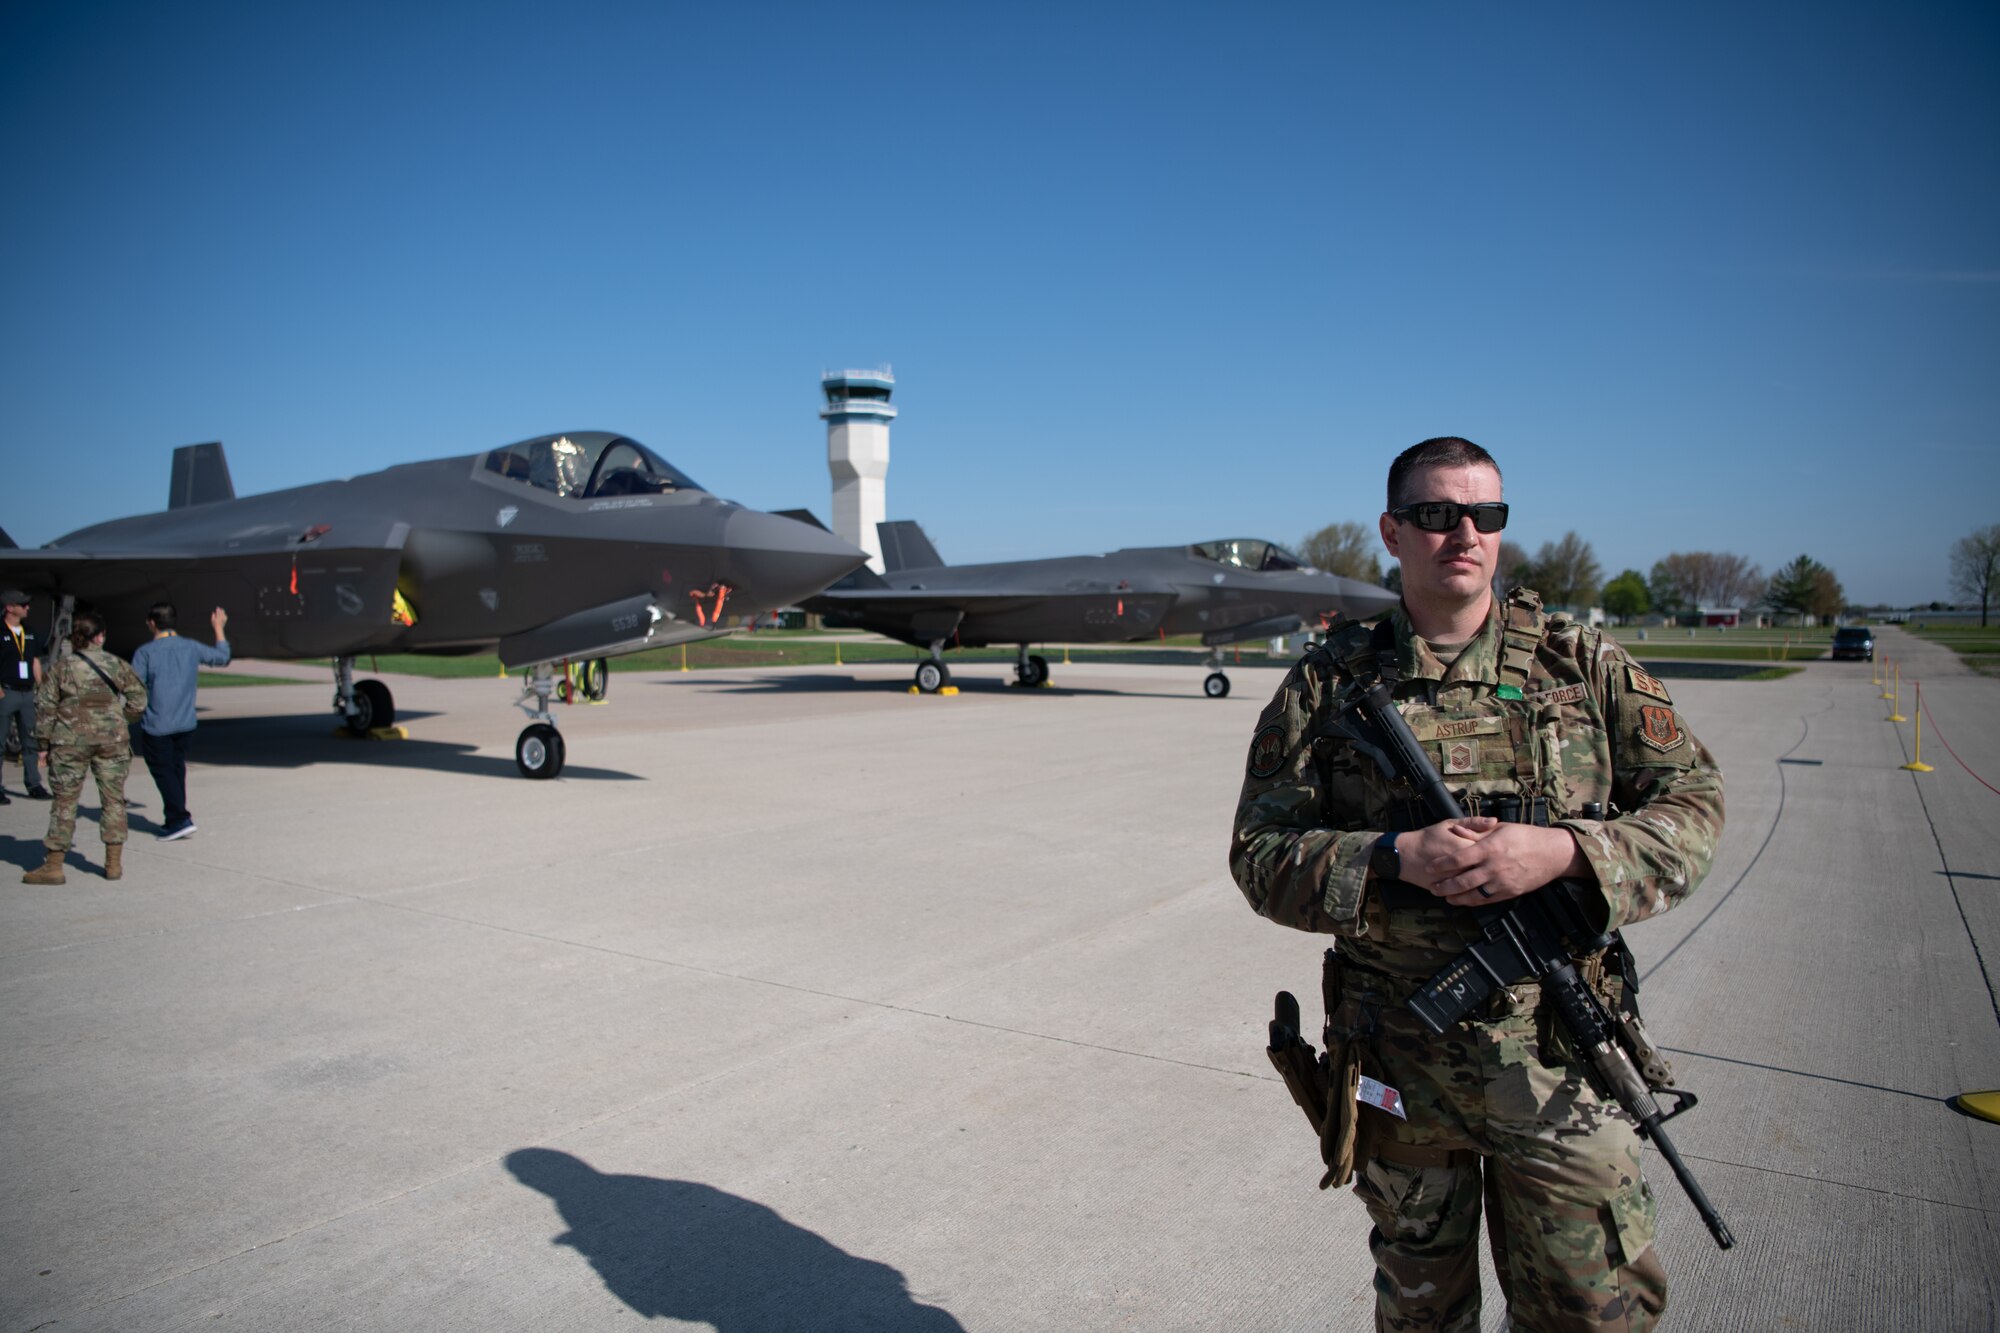 An Airman provides security for an F-35 Lightning II aircraft static display